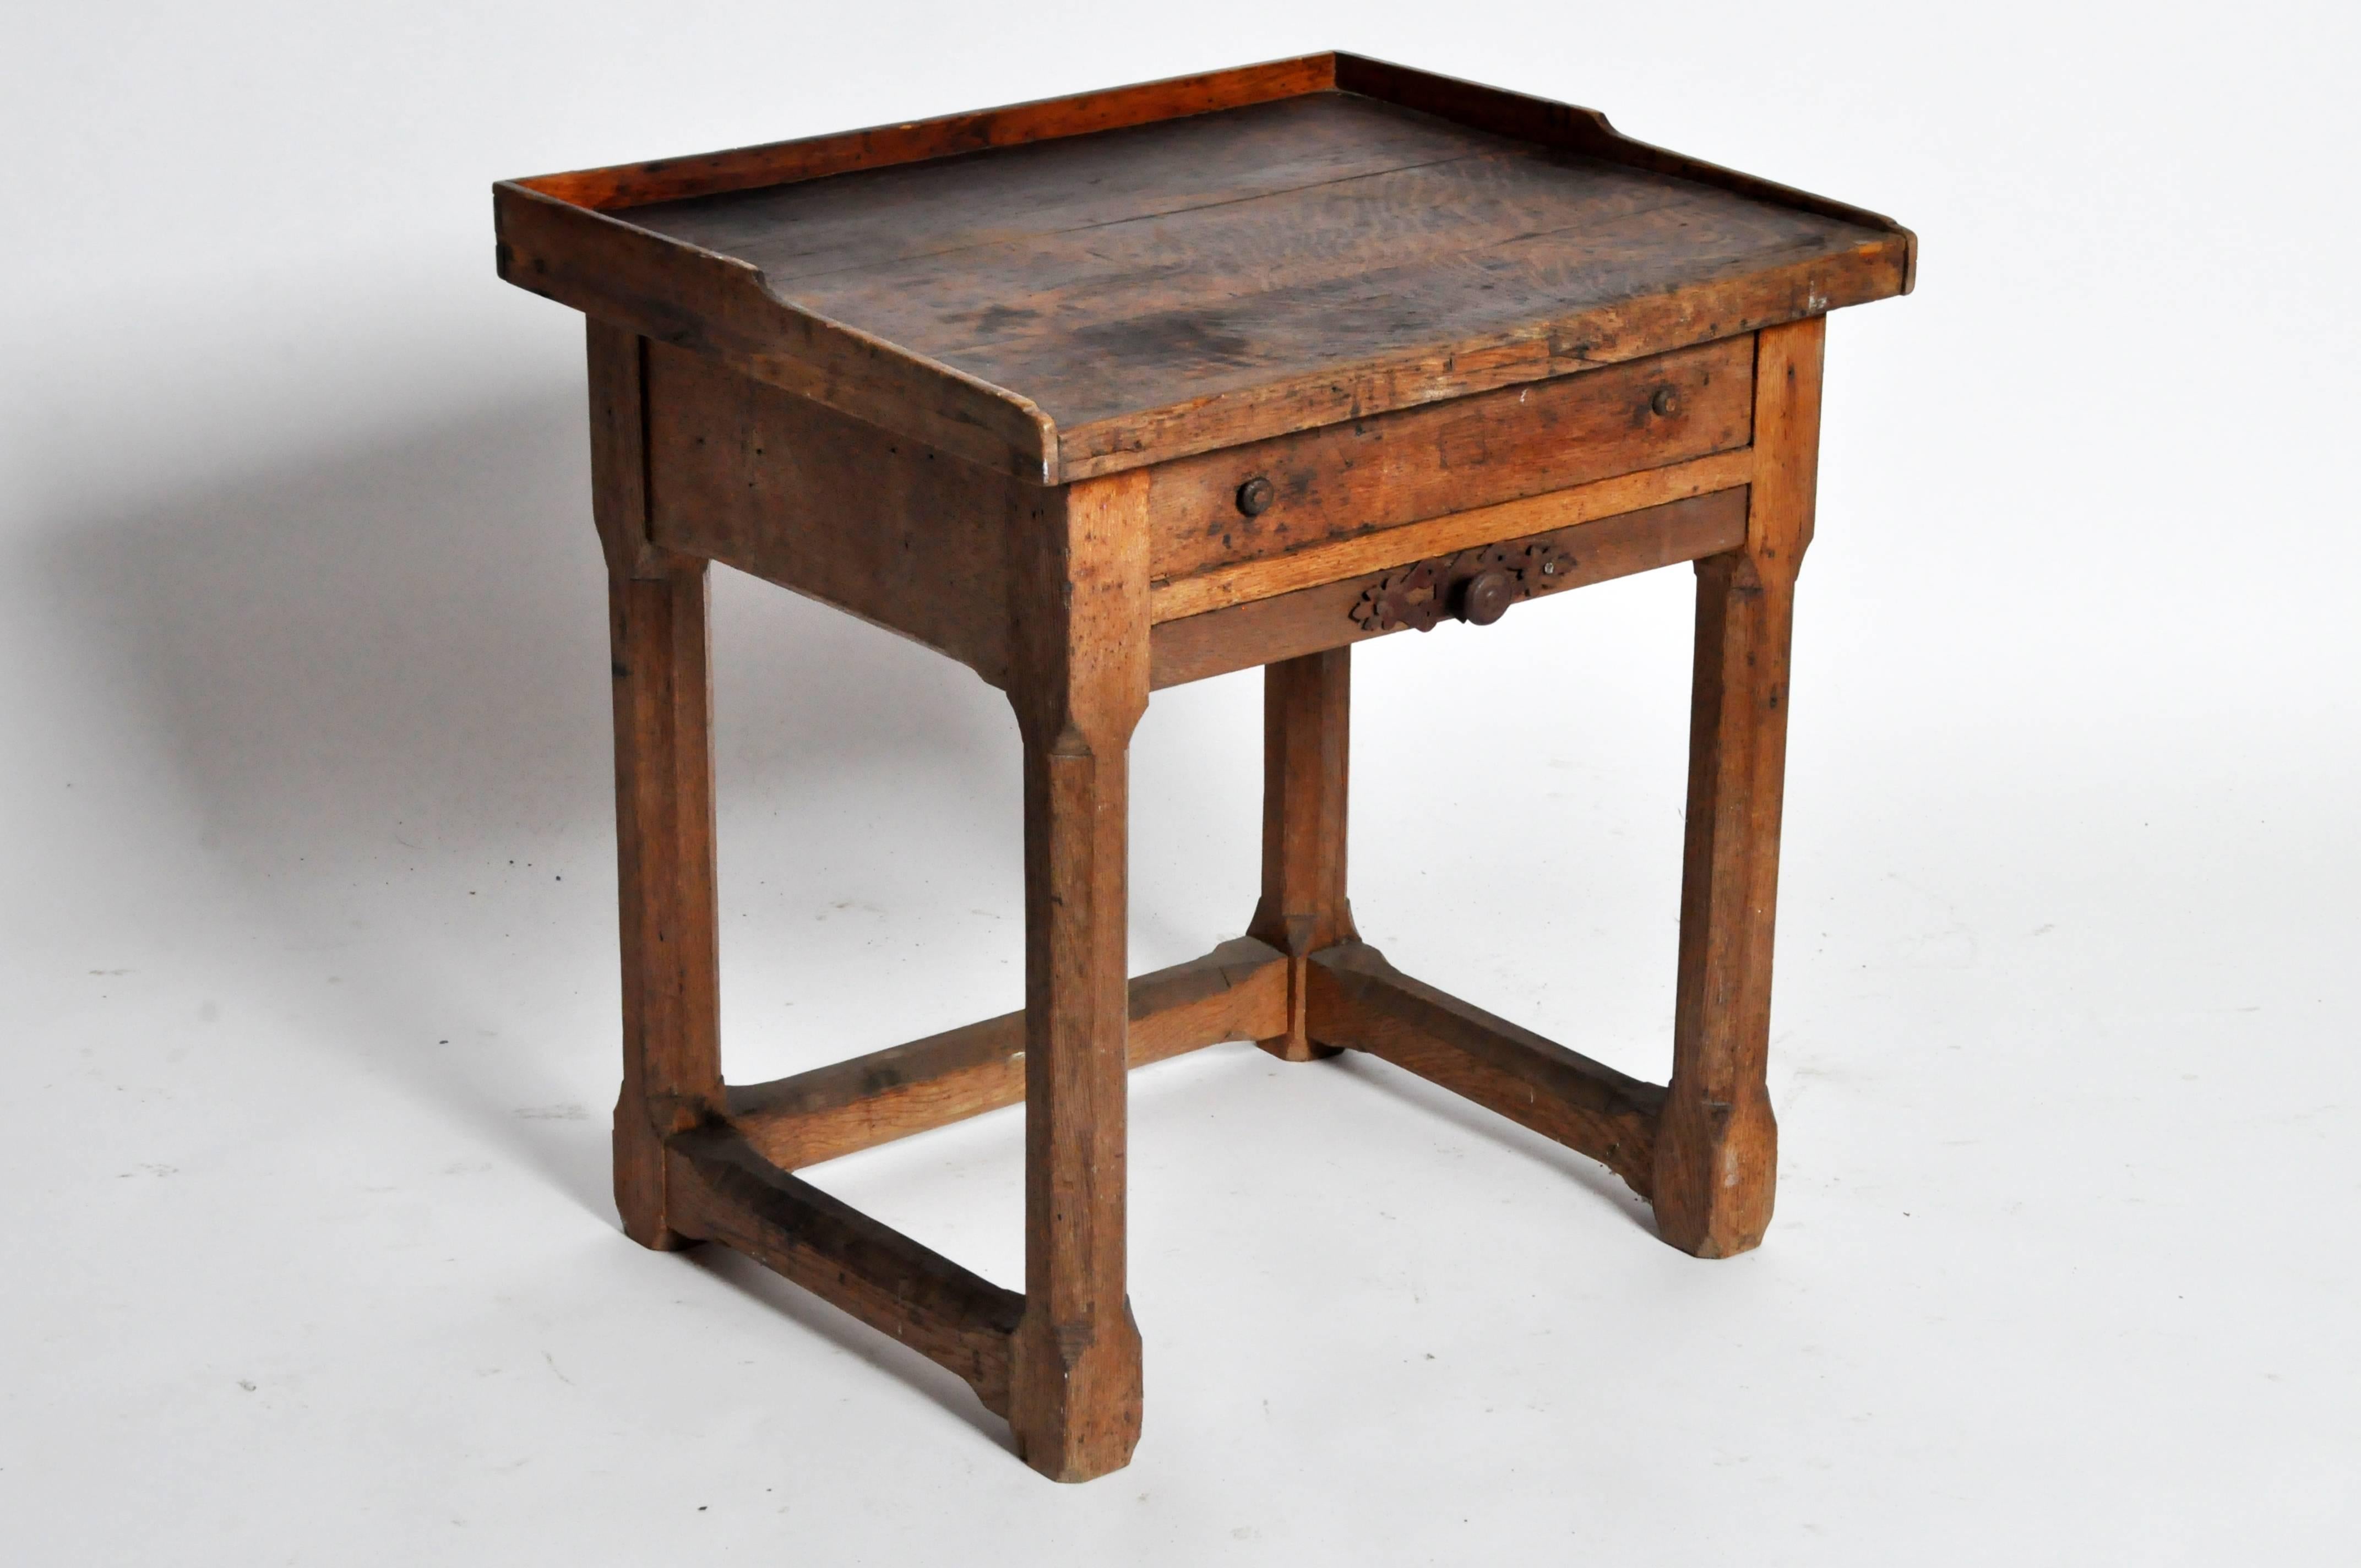 This jeweler's table is from France and is made from oakwood, circa 1900. It features two drawers for storage and chamfered legs.